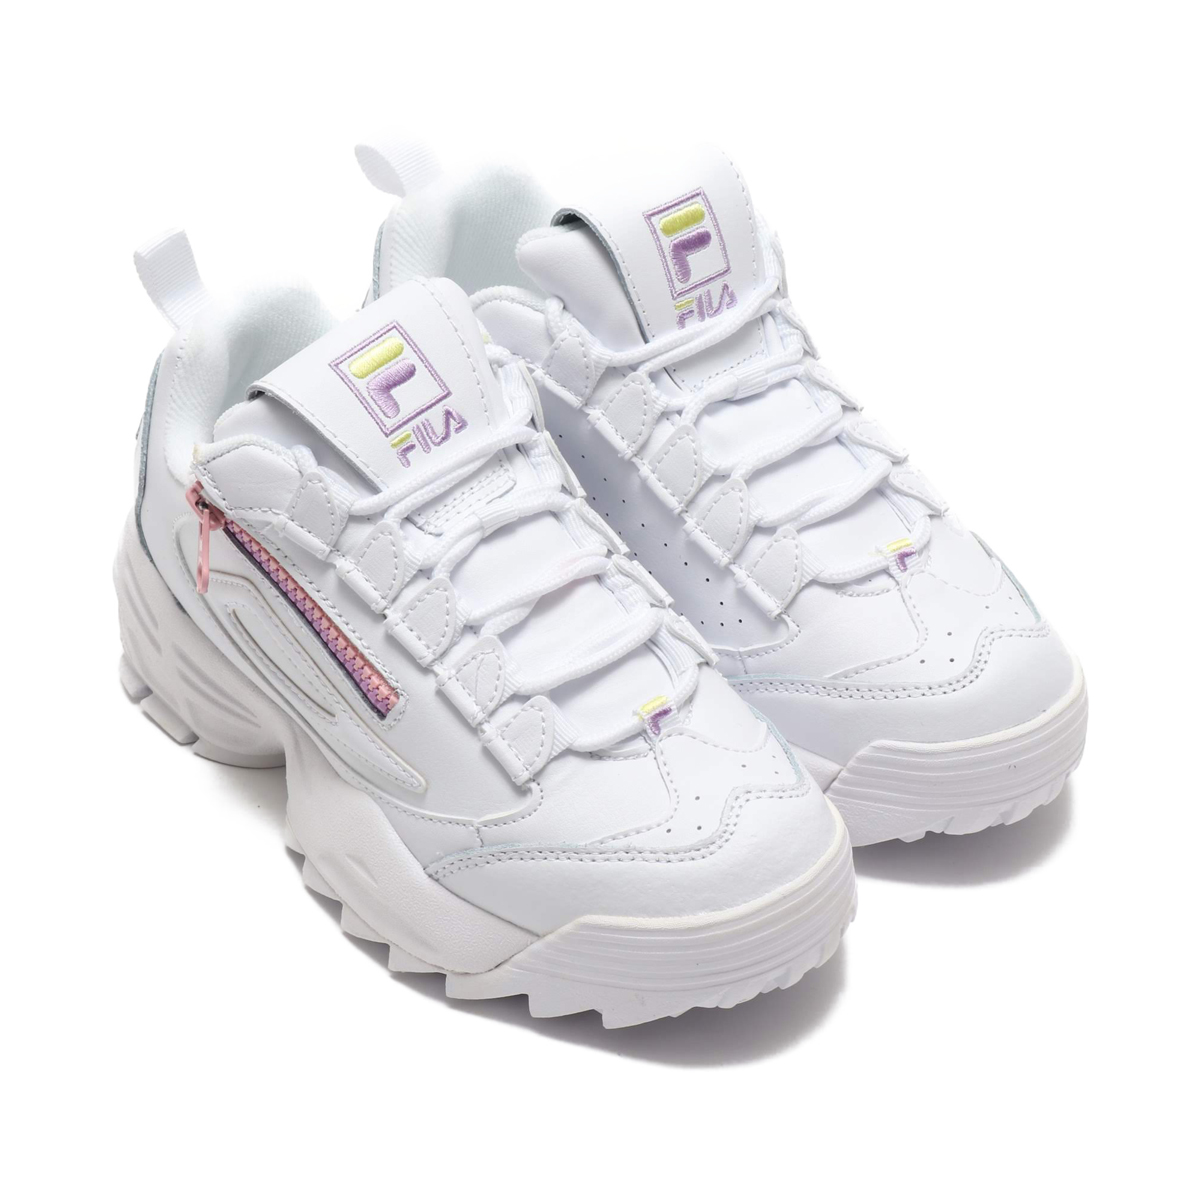 fila shoes yellow and white